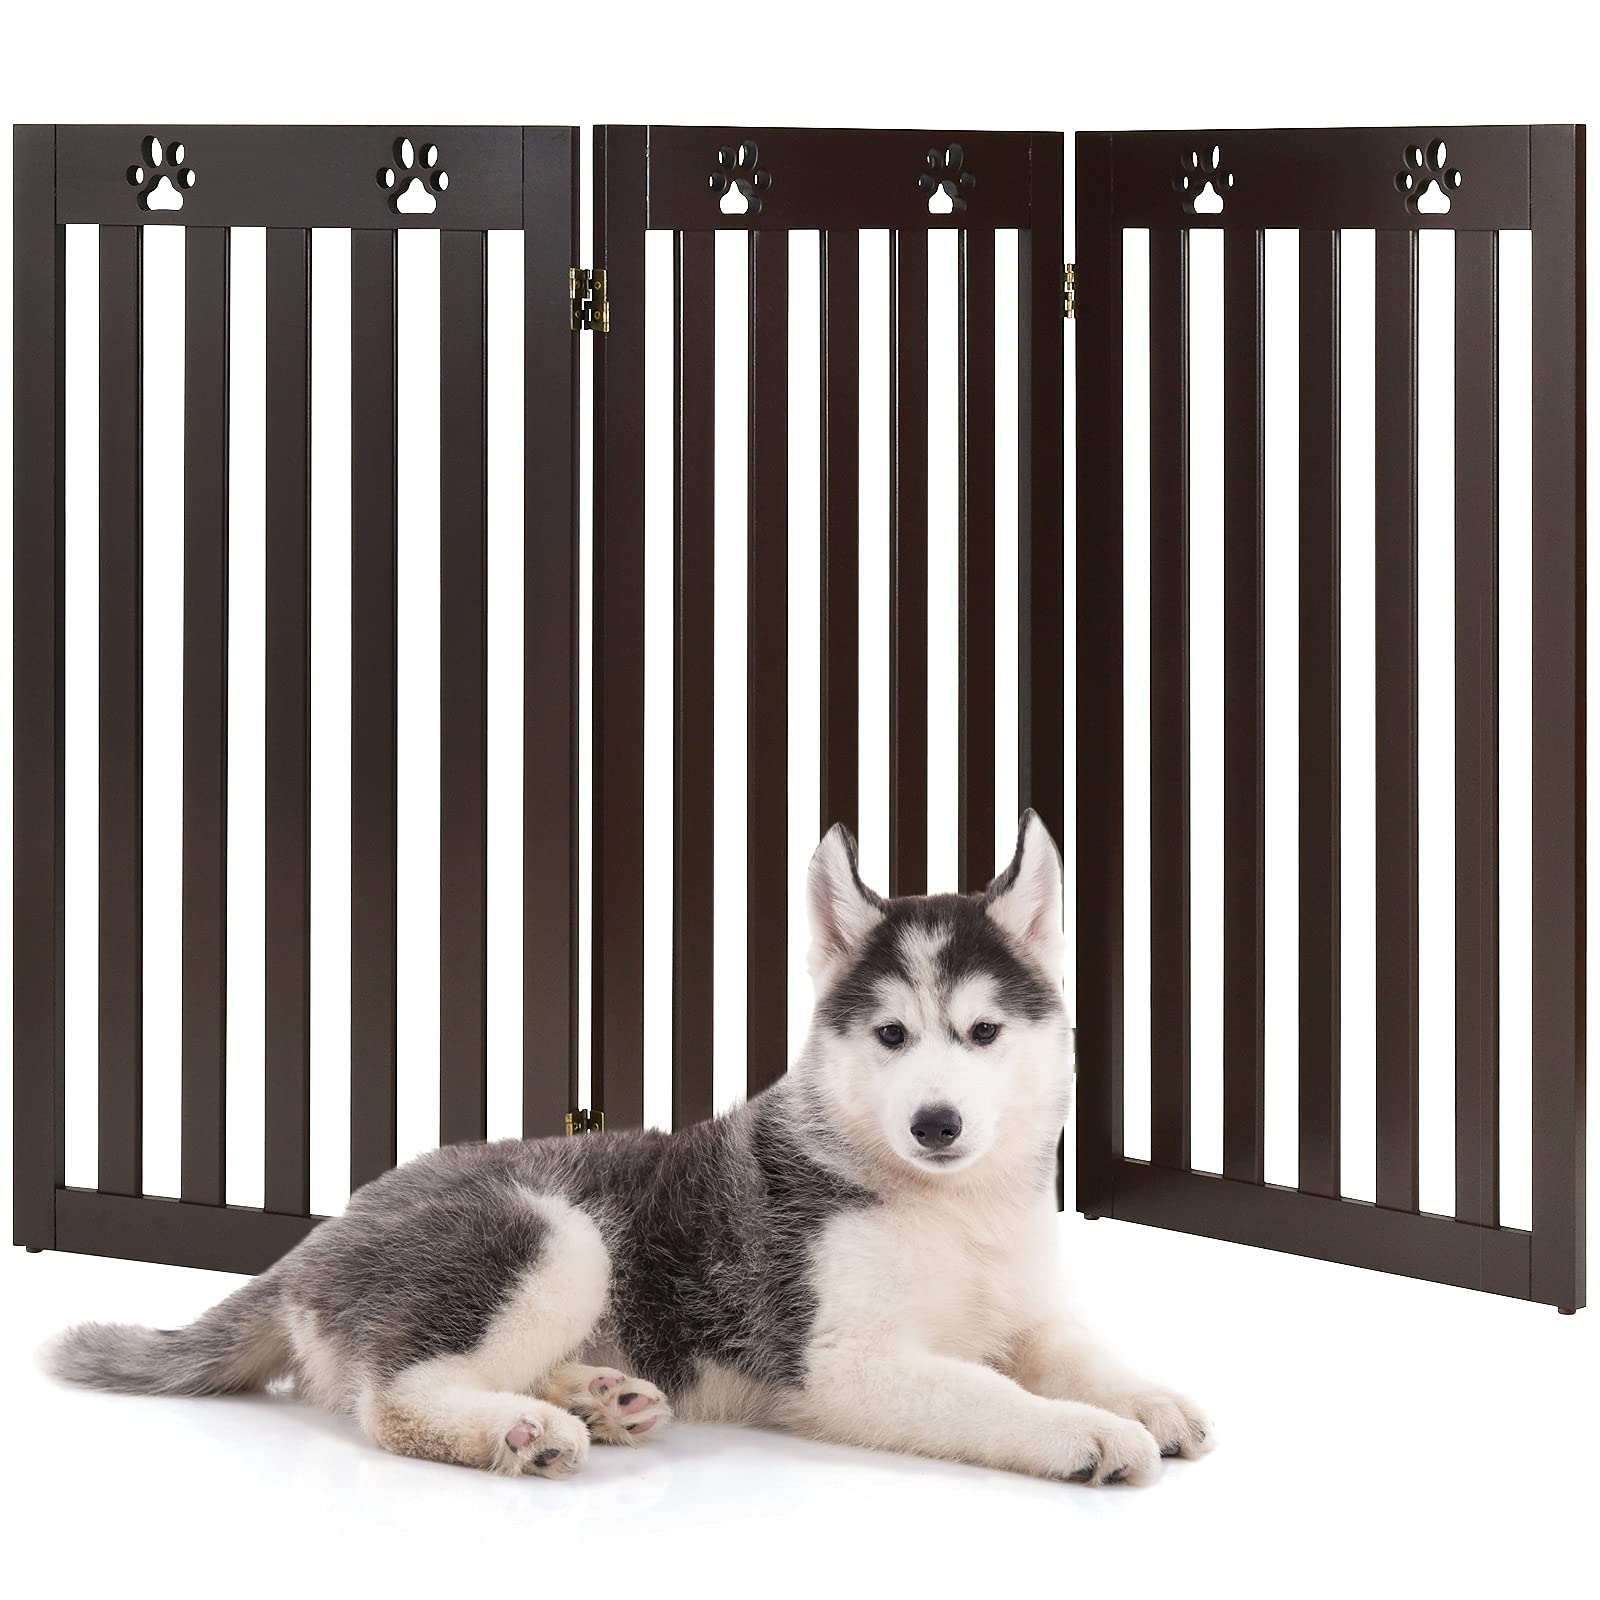 Giantex Wooden Freestanding Pet Gate, 3 Panel-36 inch Height Large Dog Fence